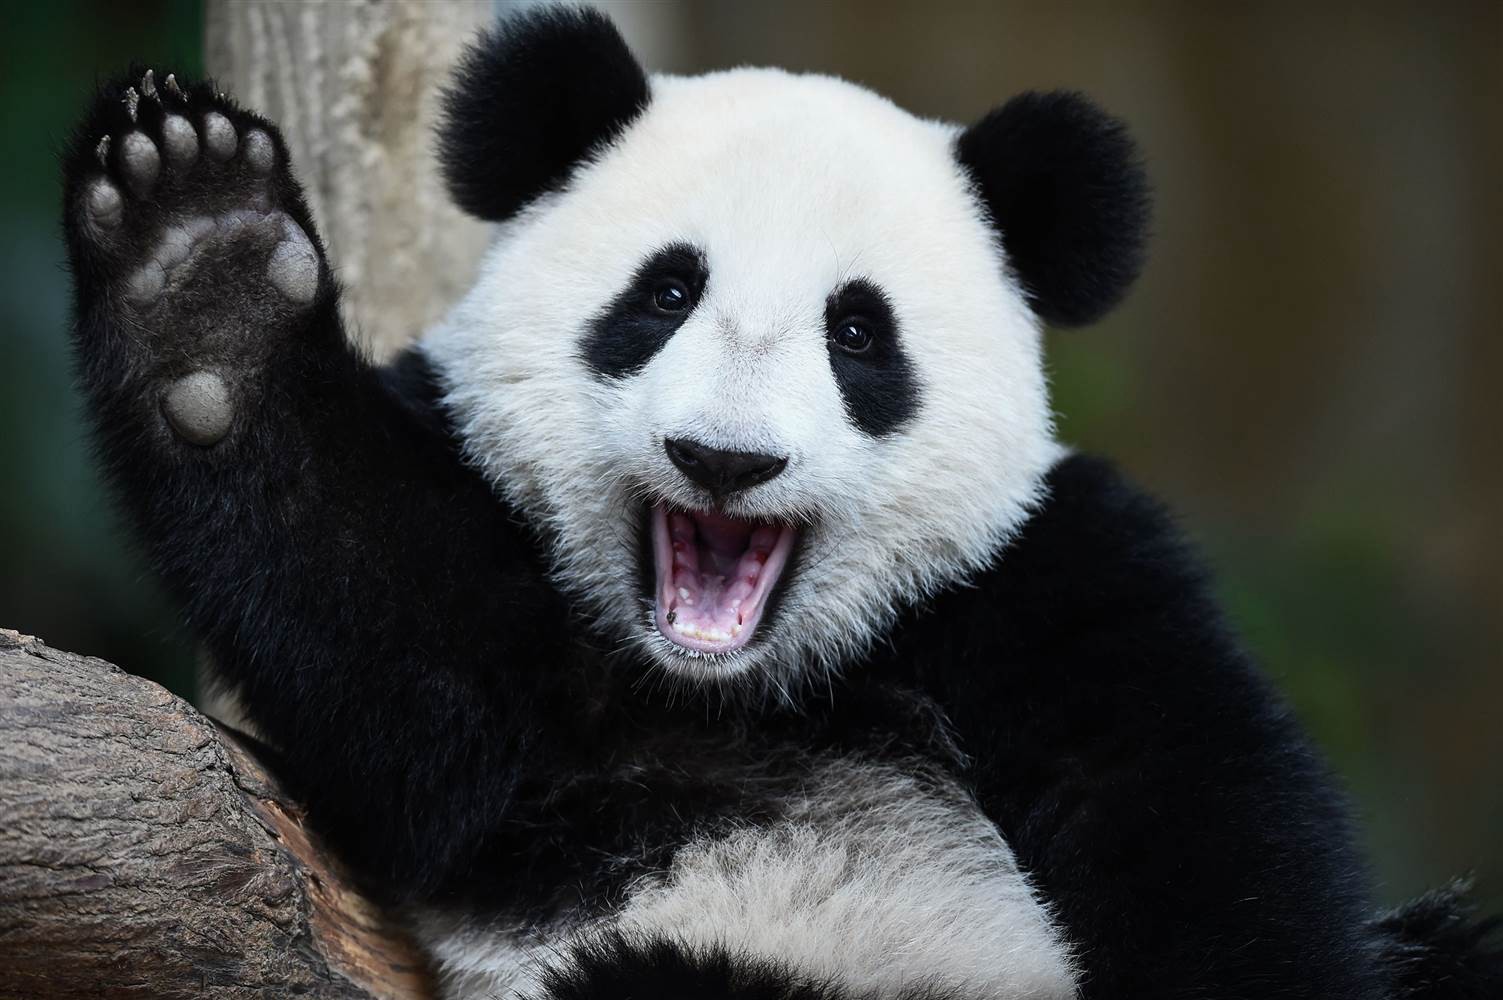 Can You Match These Animals With Their Natural Food Source? Giant panda bear